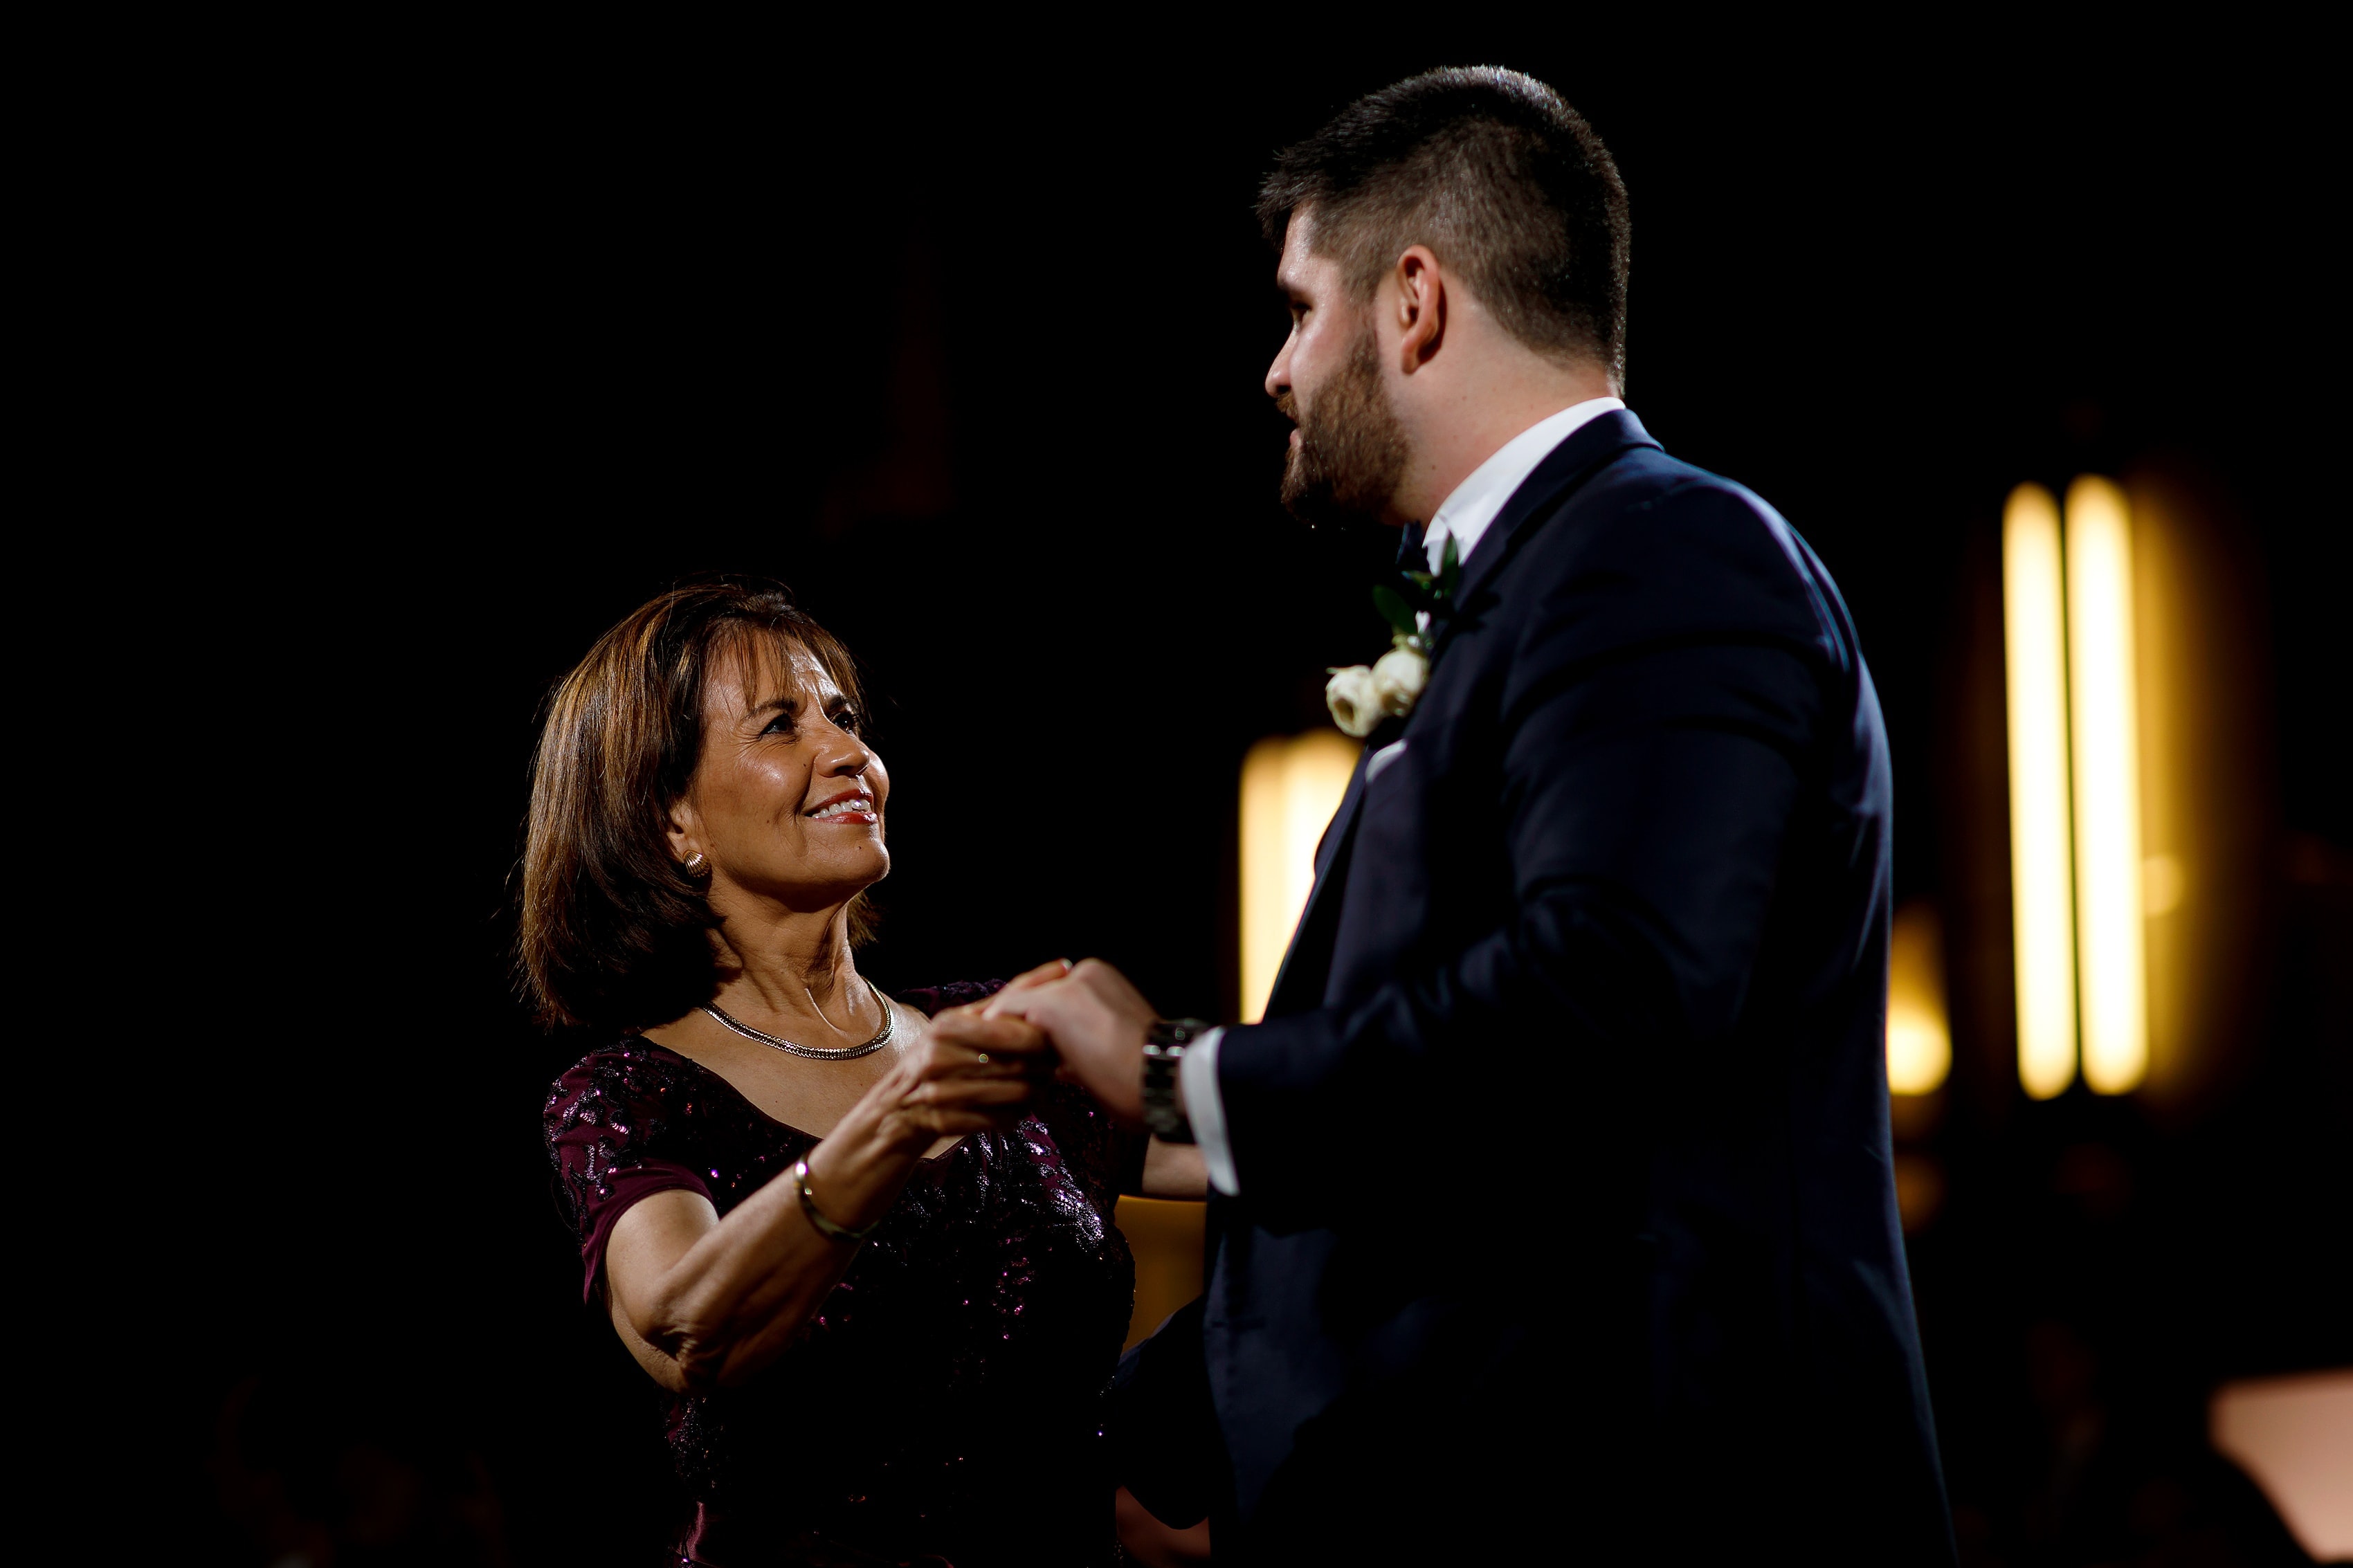 mother of the groom shares dance with her son during wedding reception at Pazzo's at Three-Eleven in downtown Chicago